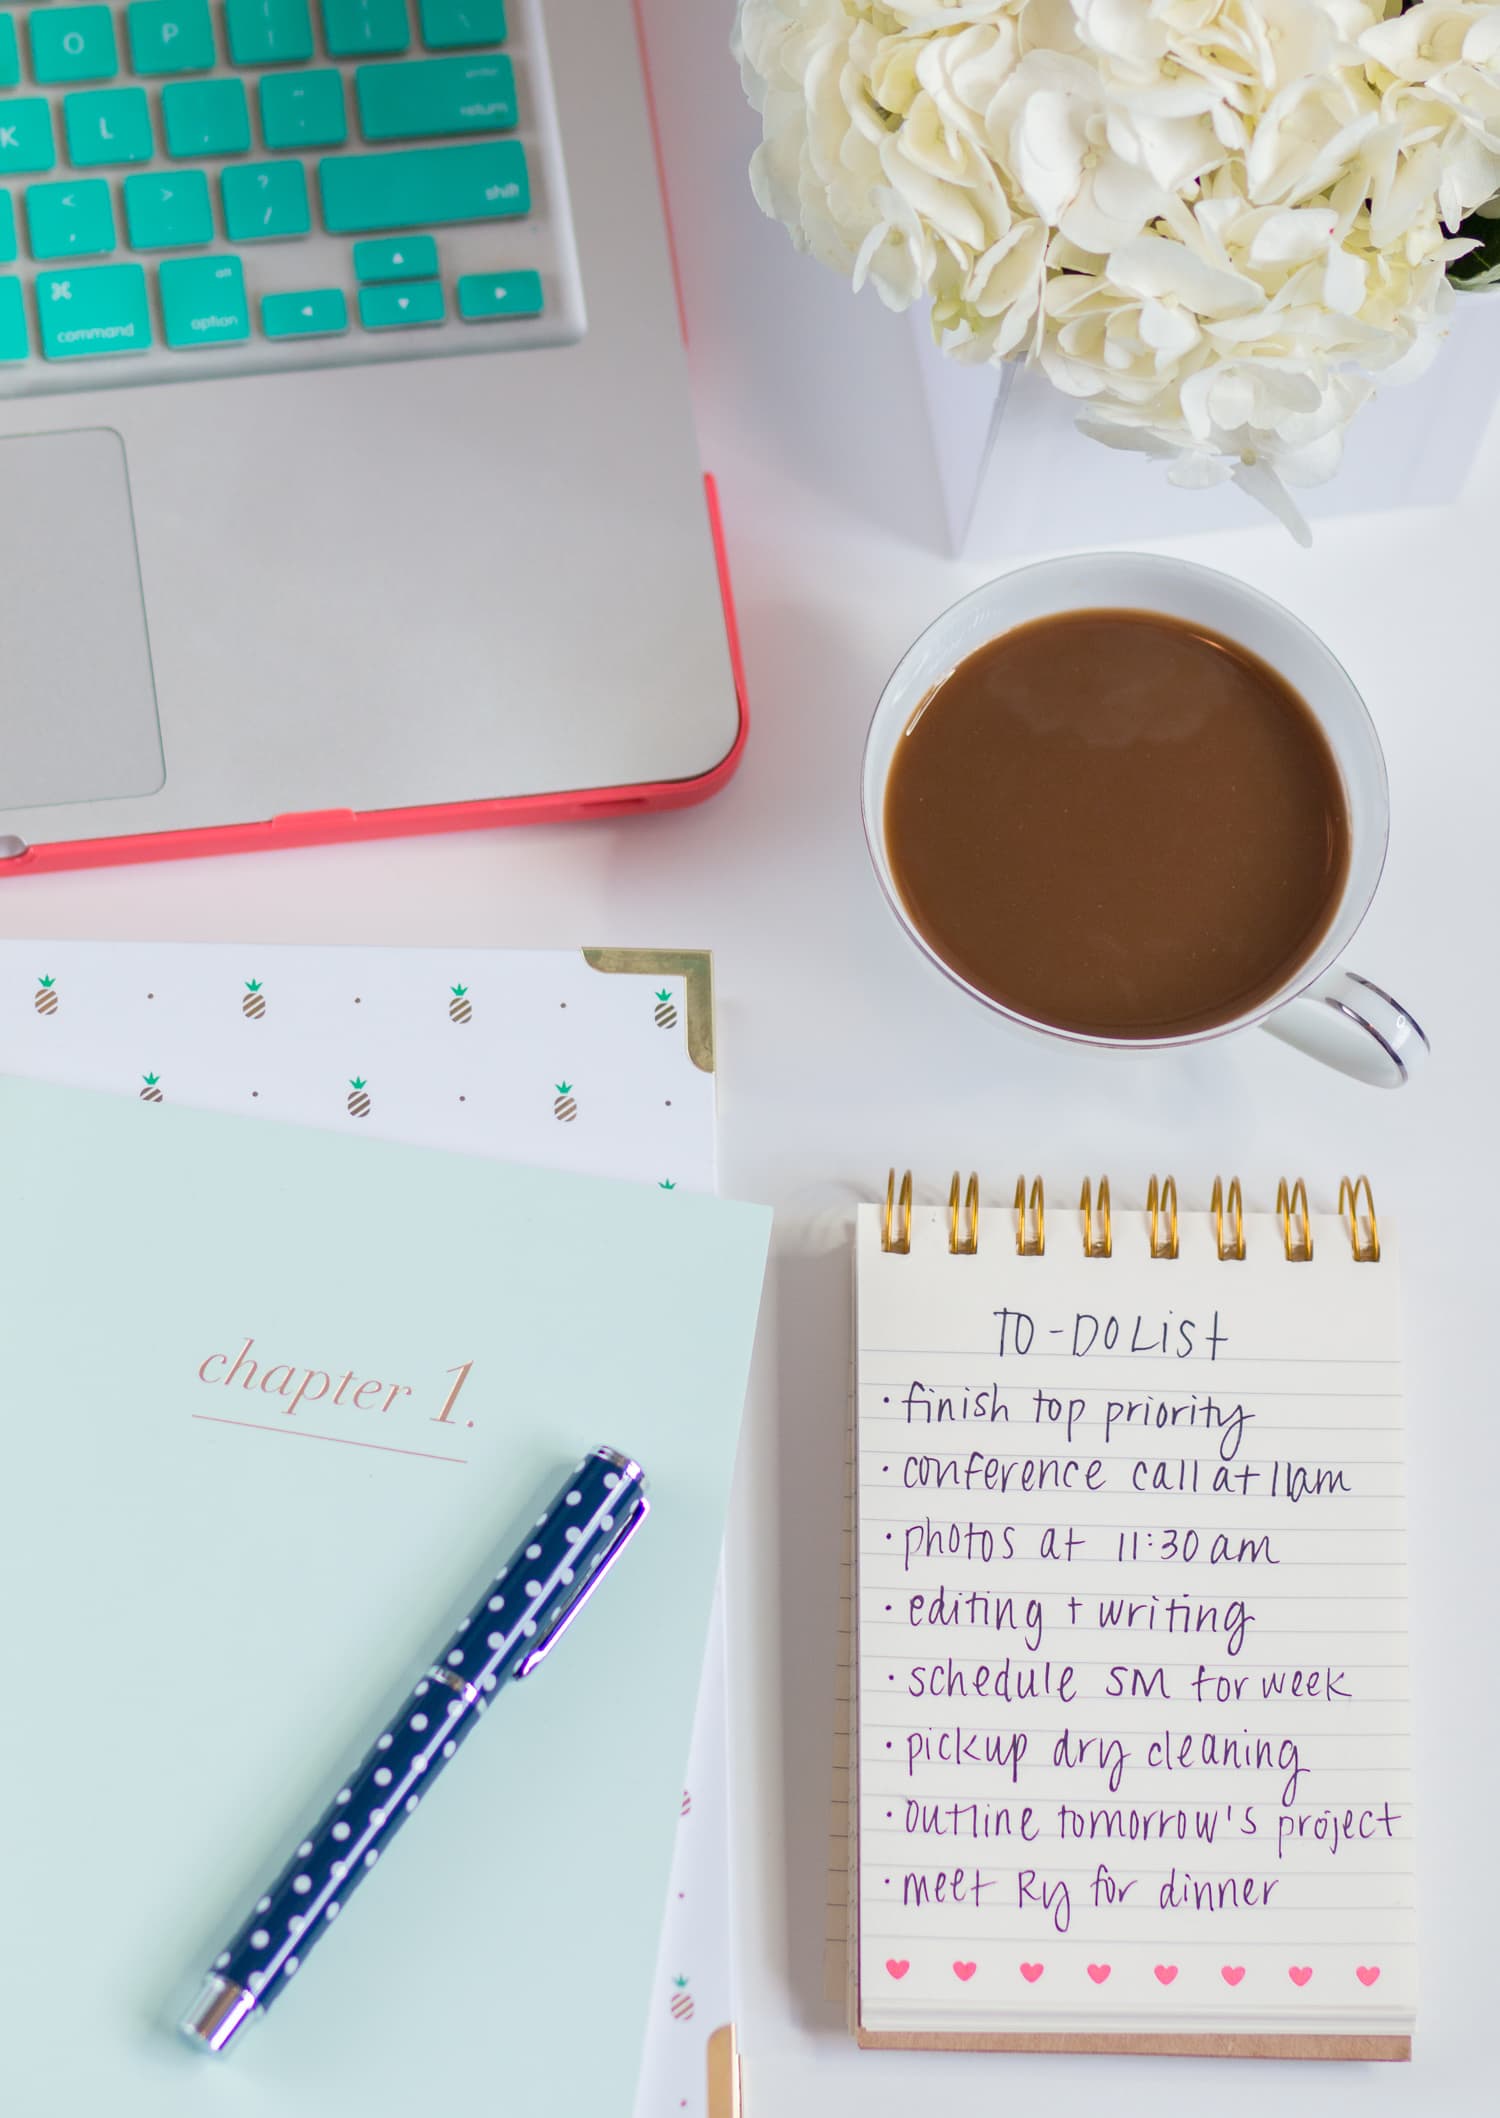 How to make your mornings more productive with blogger Ashley Brooke Nicholas